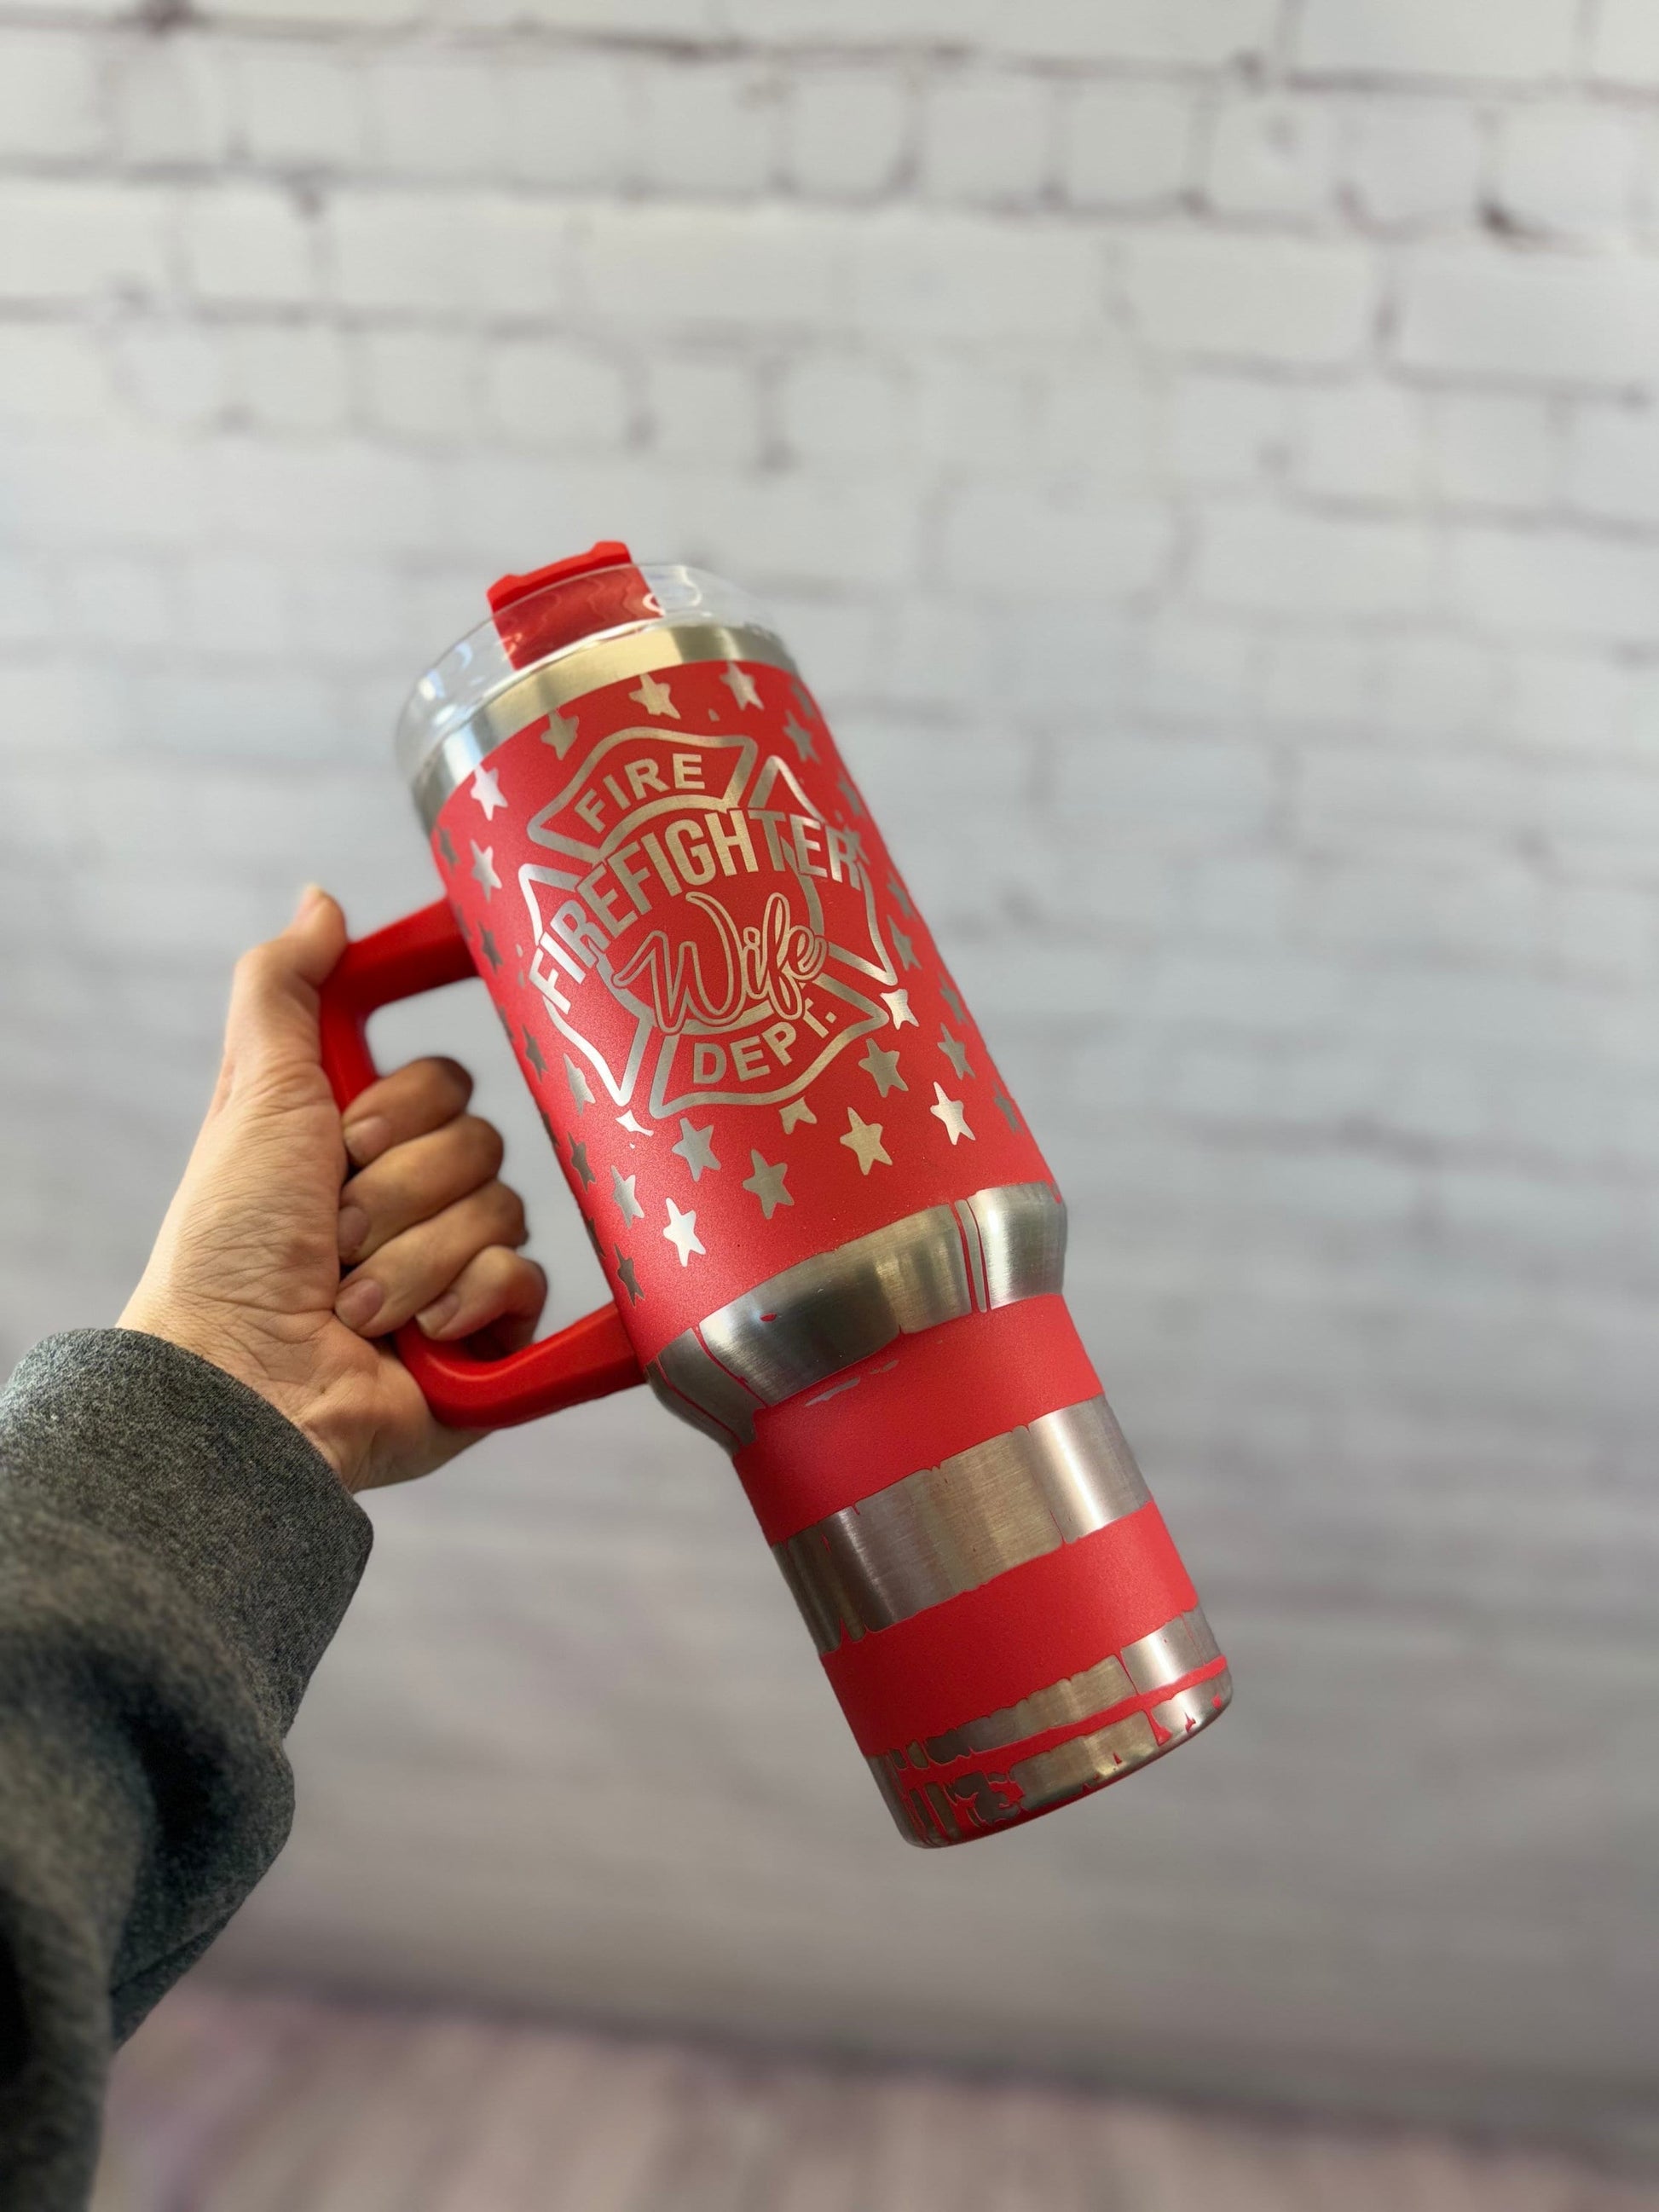 Firefighter Wife Engraved Tumbler | 40 Ounce Tumbler | Fire Wife Water Bottle | Fire Wife Gift | Fireman Gift | Thin Red Line Gift